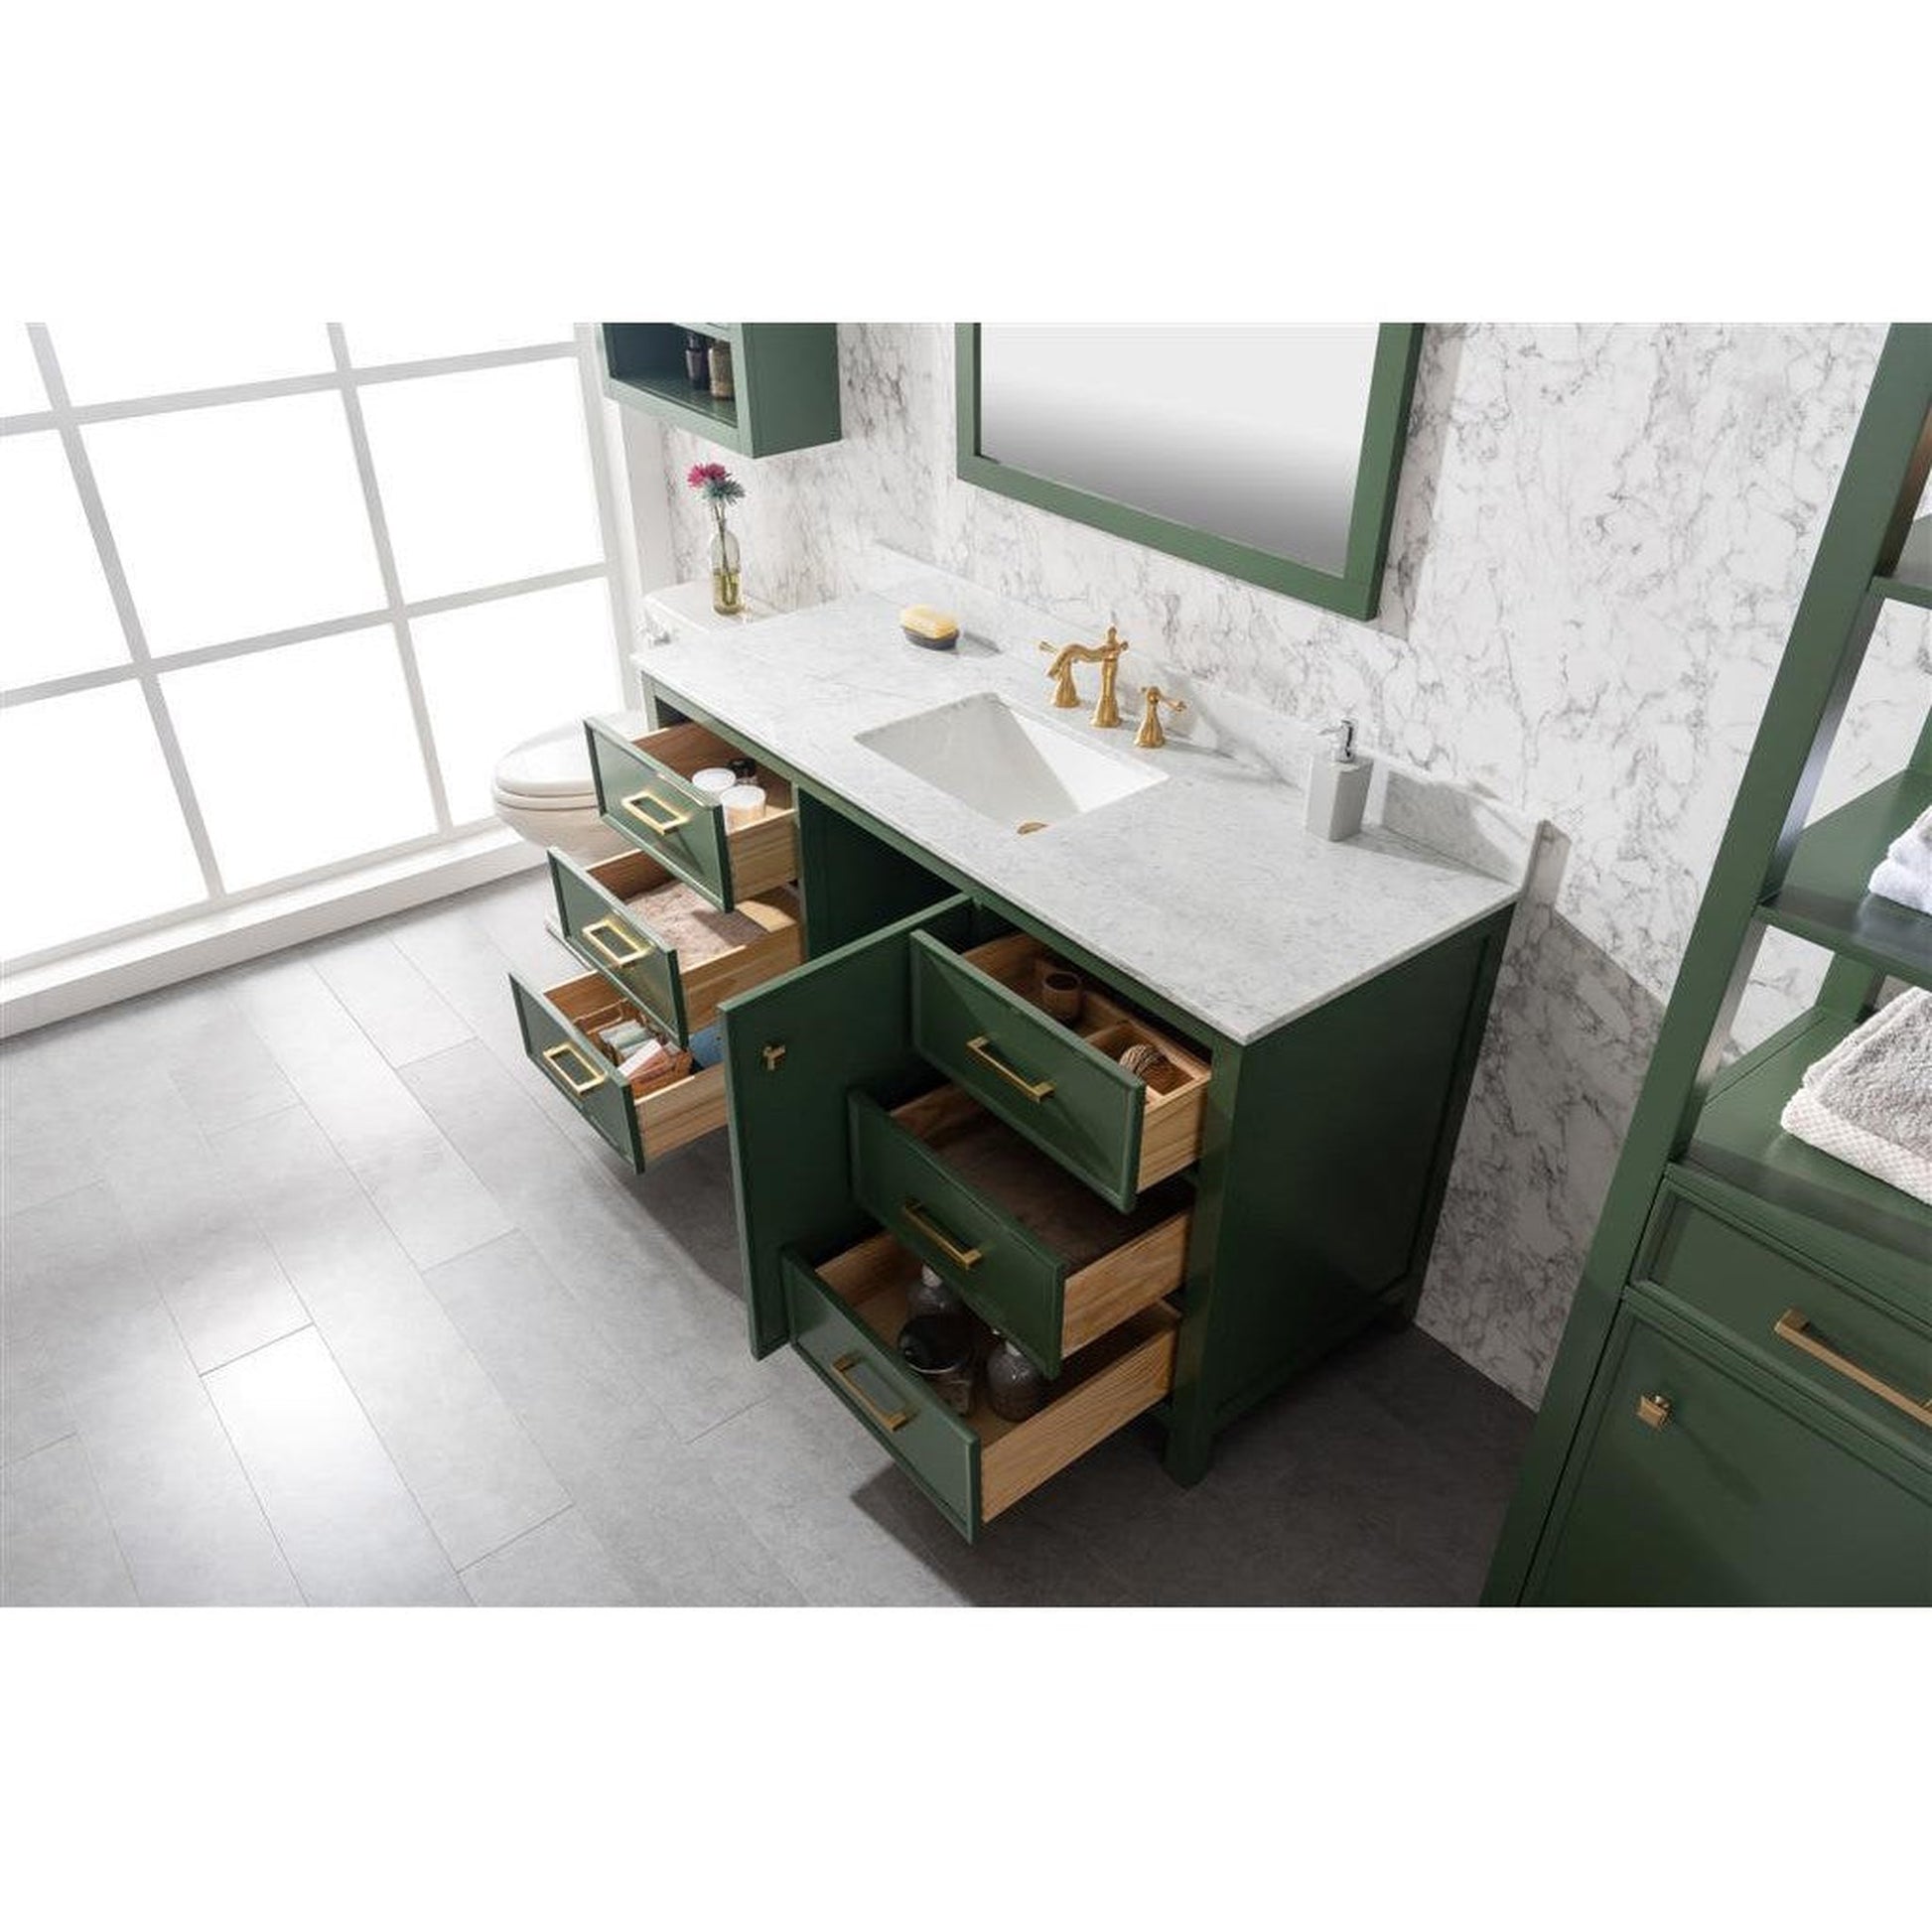 Legion Furniture WLF2160S 60" Vogue Green Freestanding Vanity With White Carrara Marble Top and Single White Ceramic Sink